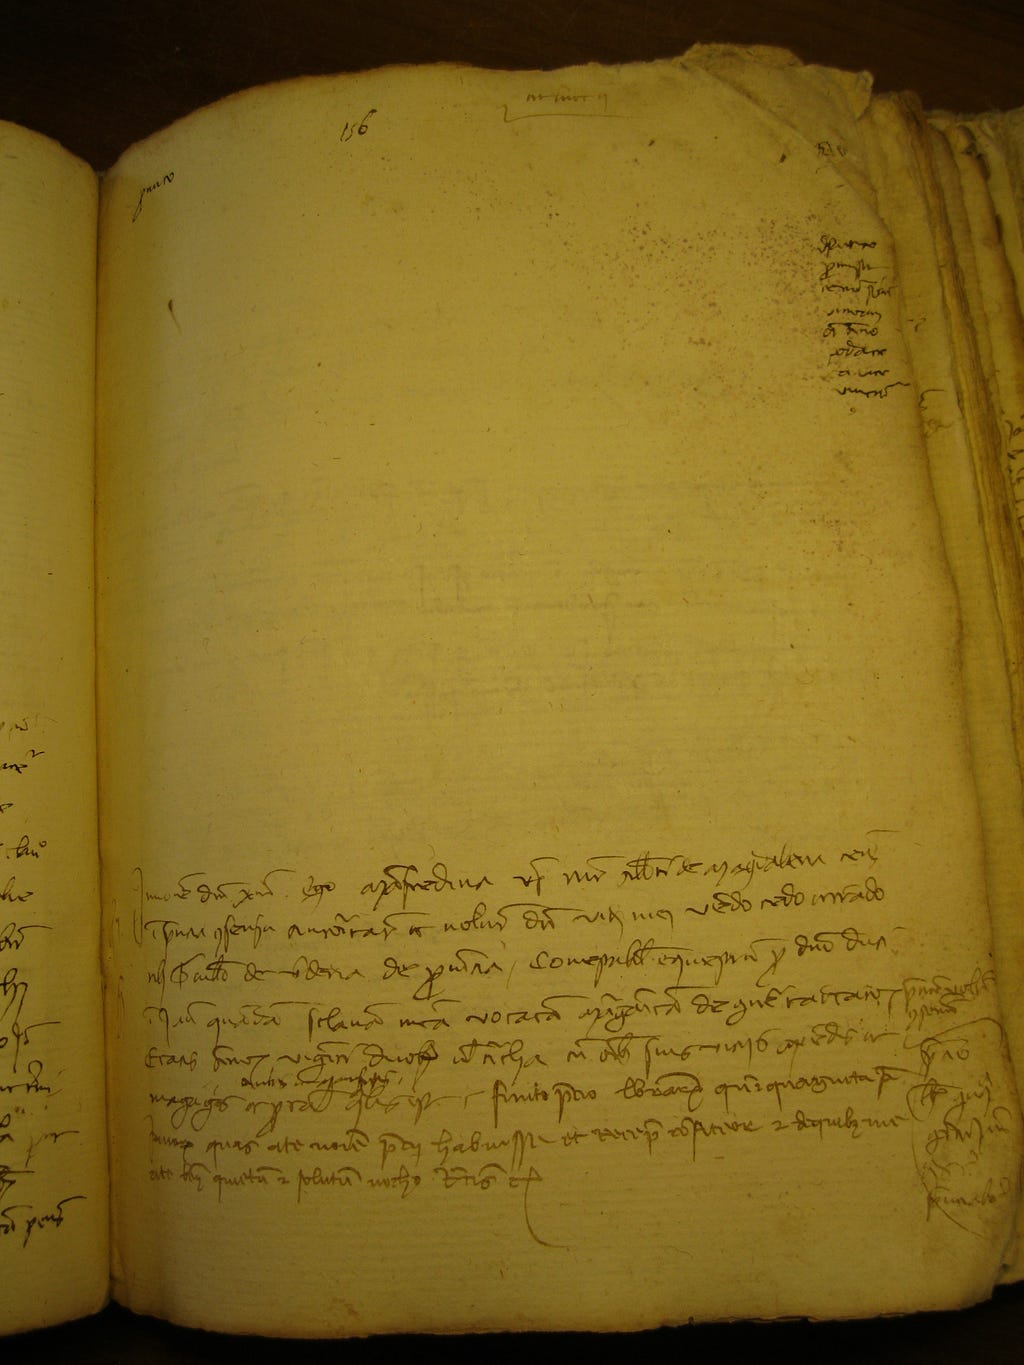 Page from a manuscript with handwriting on the lower third of the page.